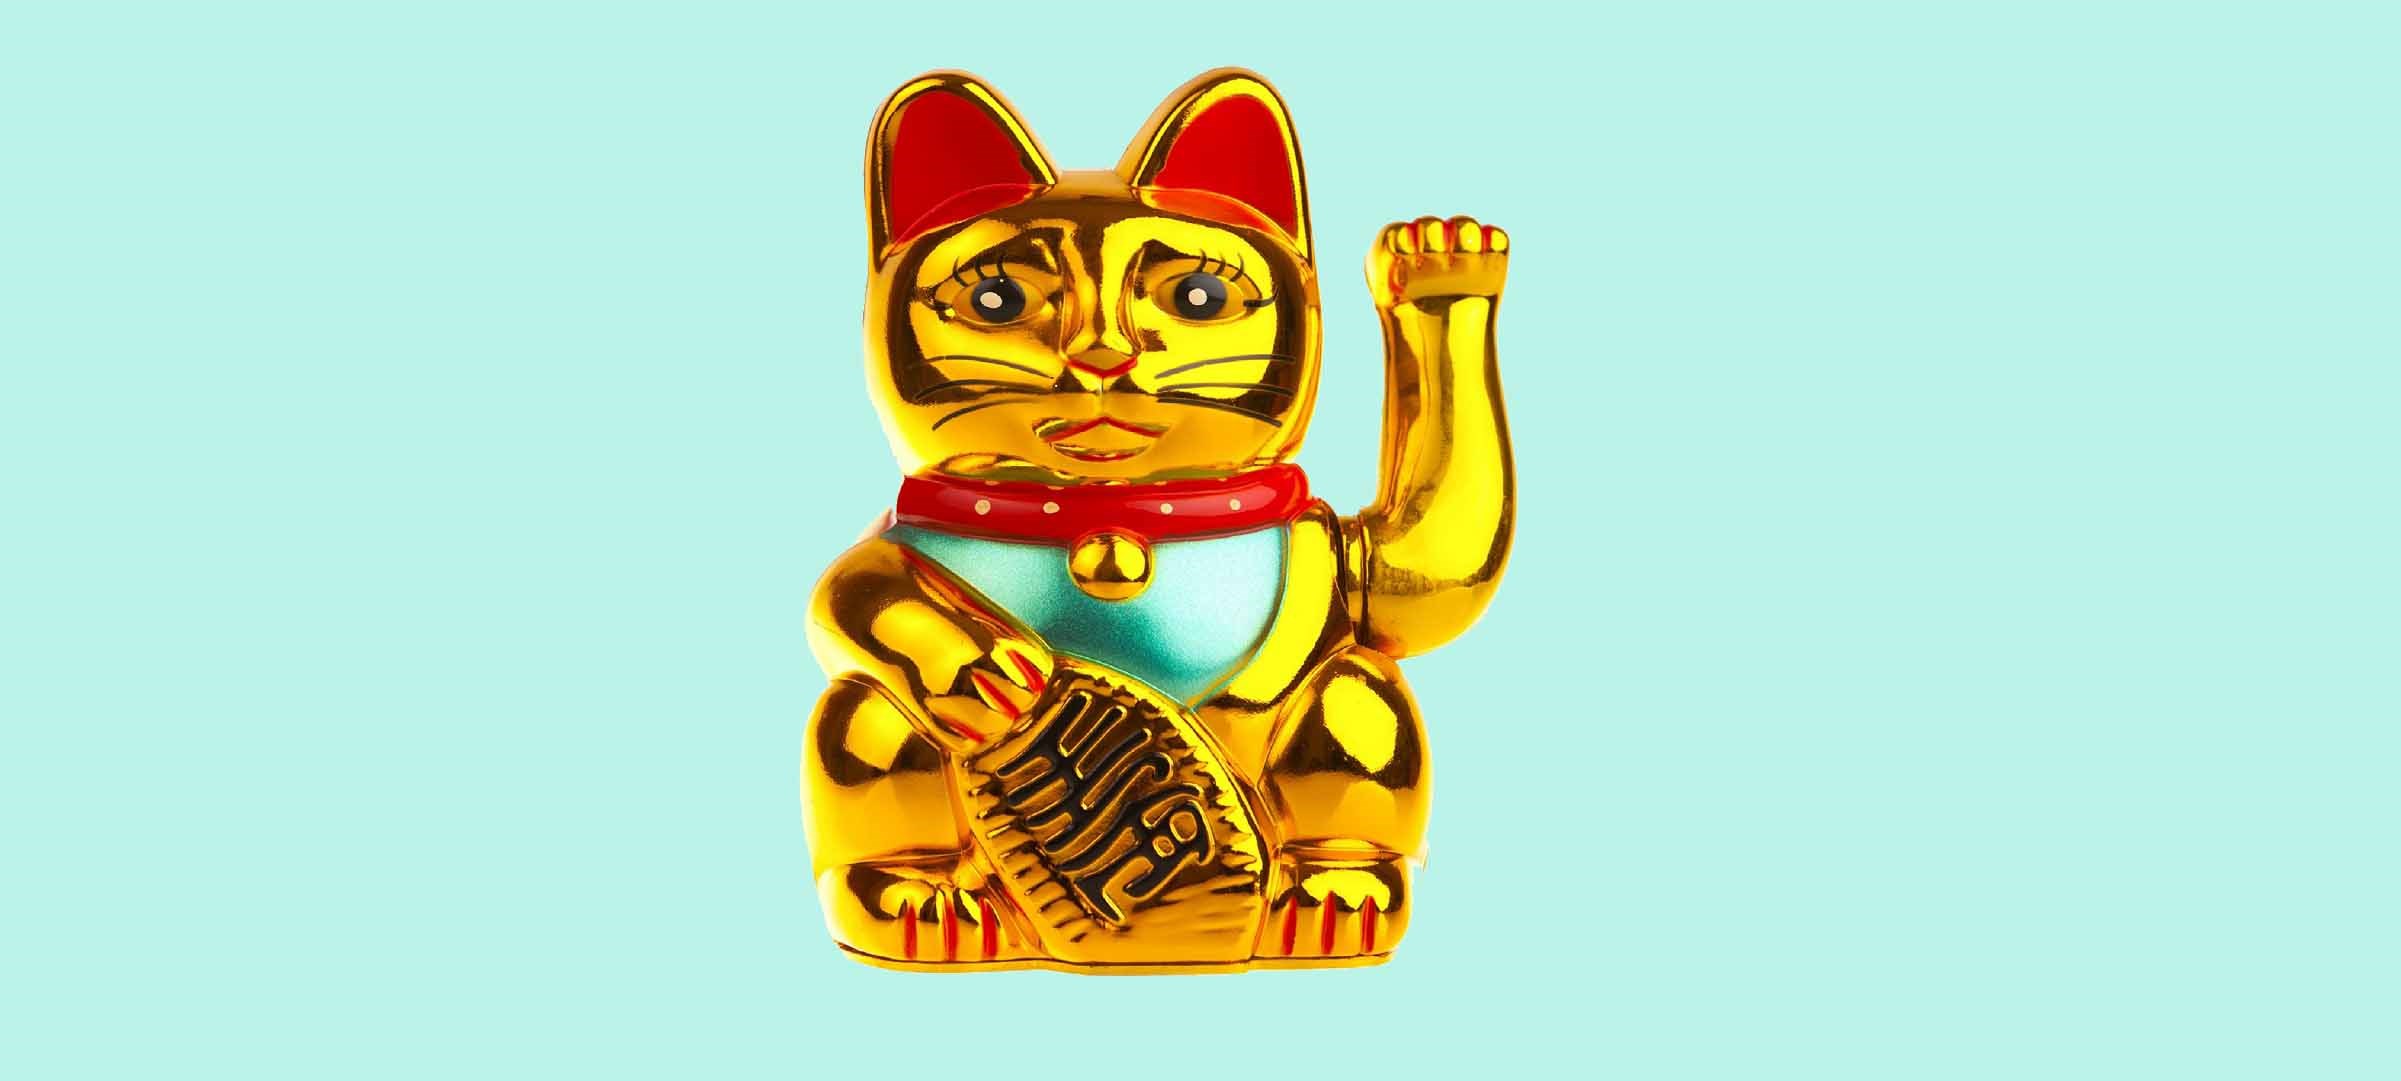 Employee Empowerment, Service Design and Japanese Lucky Cats